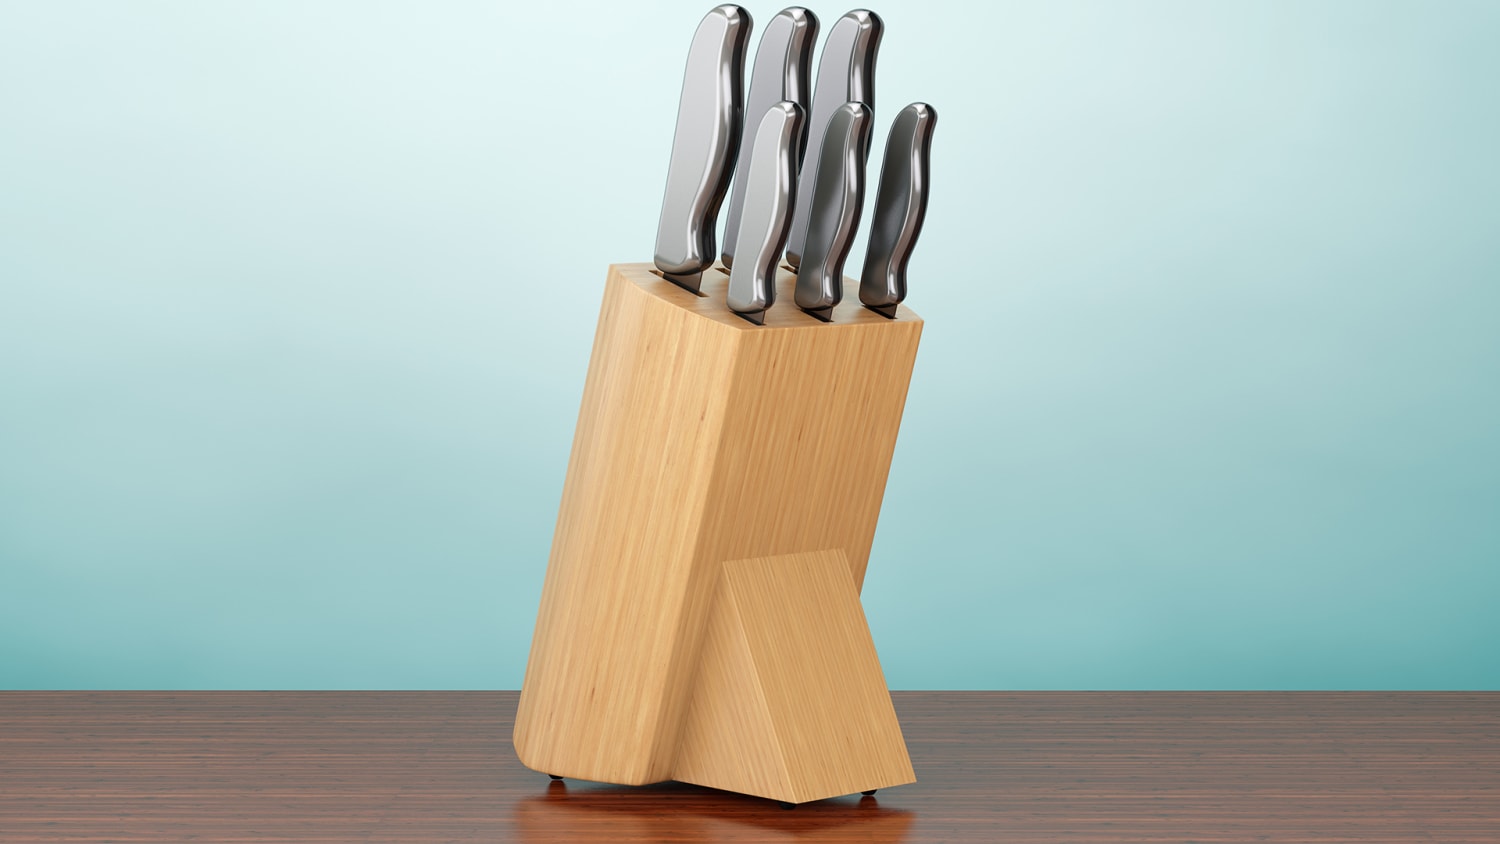 How to Clean Butcher Block Knife Holder? 